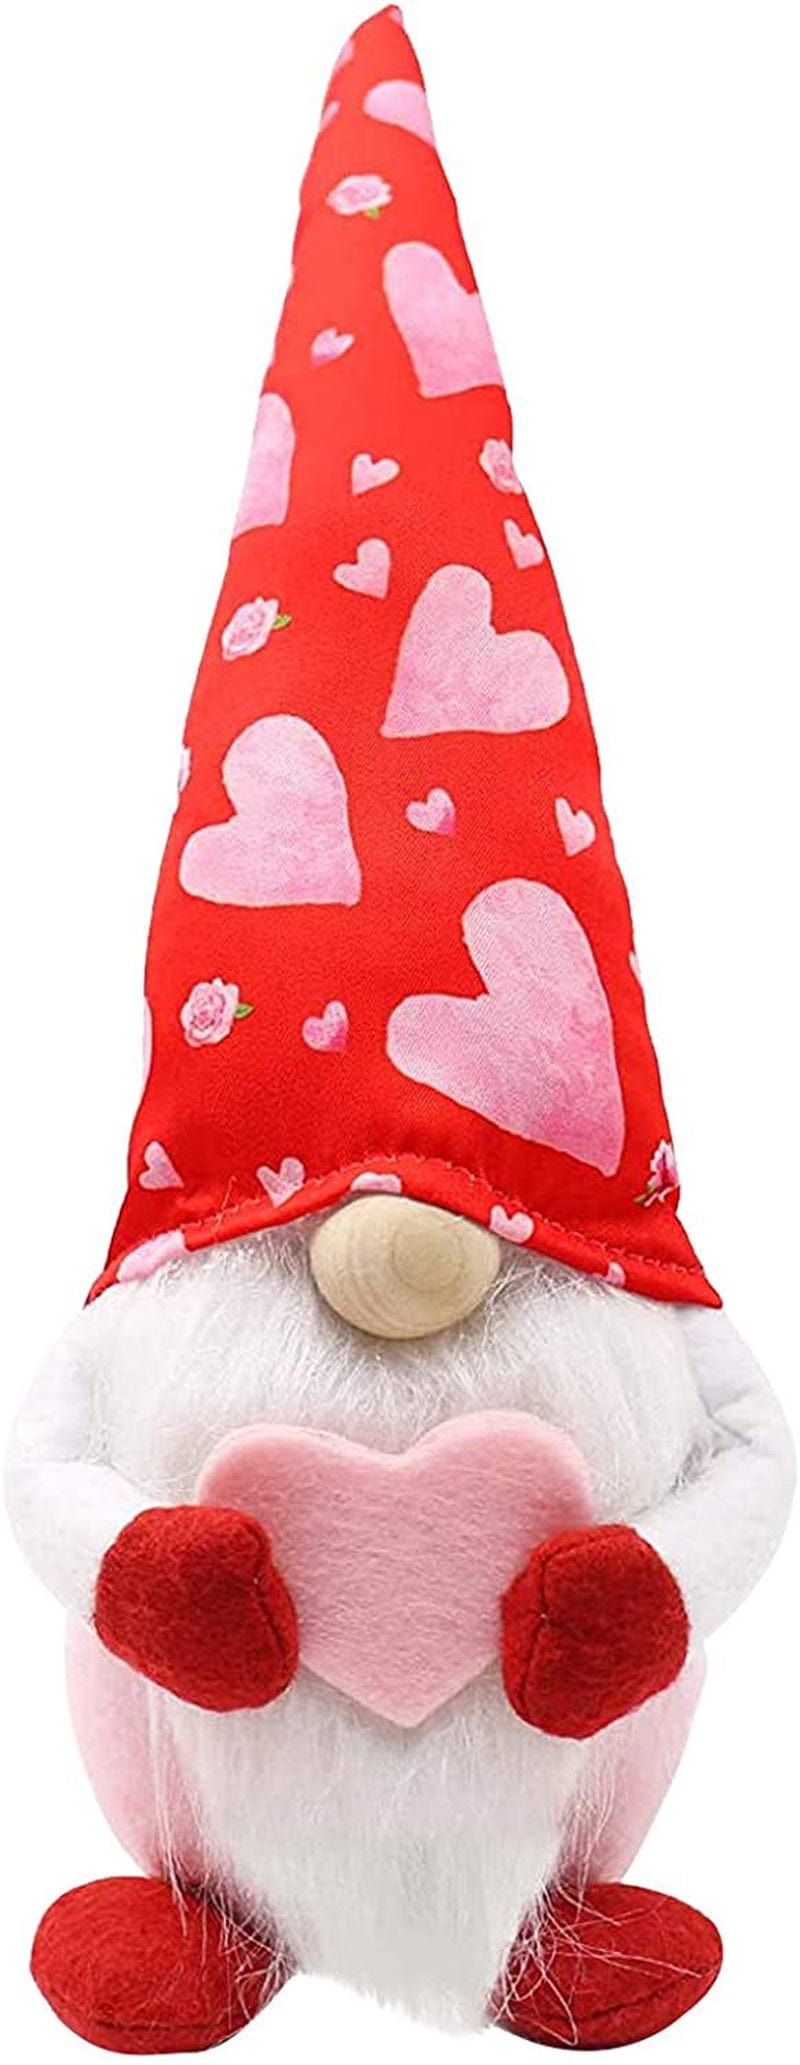 Valentines Day Gnome Plush Doll Decorations, Mr and Mrs Handmade Cloth Doll Plush Gnomes for Valentine'S Day Ornament, Valentine'S Present Home Decor Tabletop Figurines